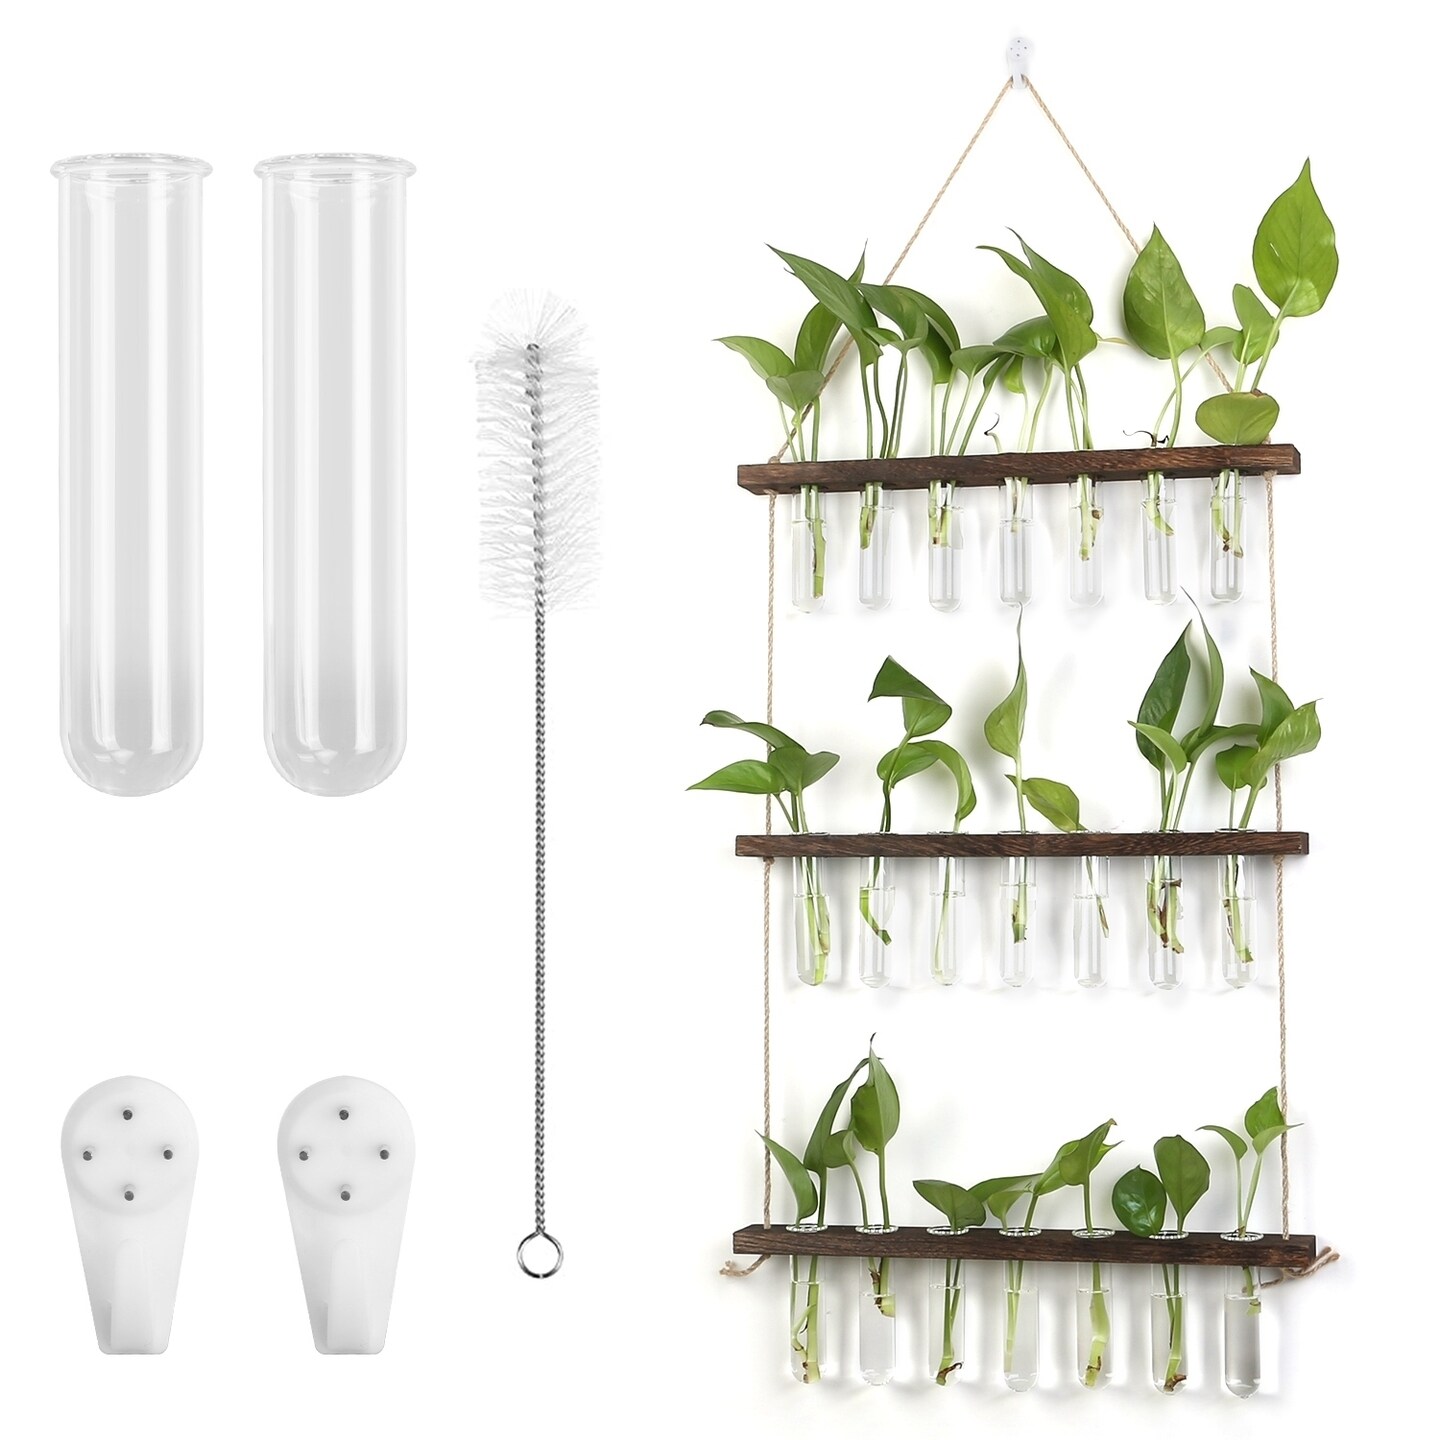 Global Phoenix 3 Tier Wall Hanging Planter Glass Hydroponic Vase Plant Flower Propagation Tube Planter Terrarium with Wooden Stand